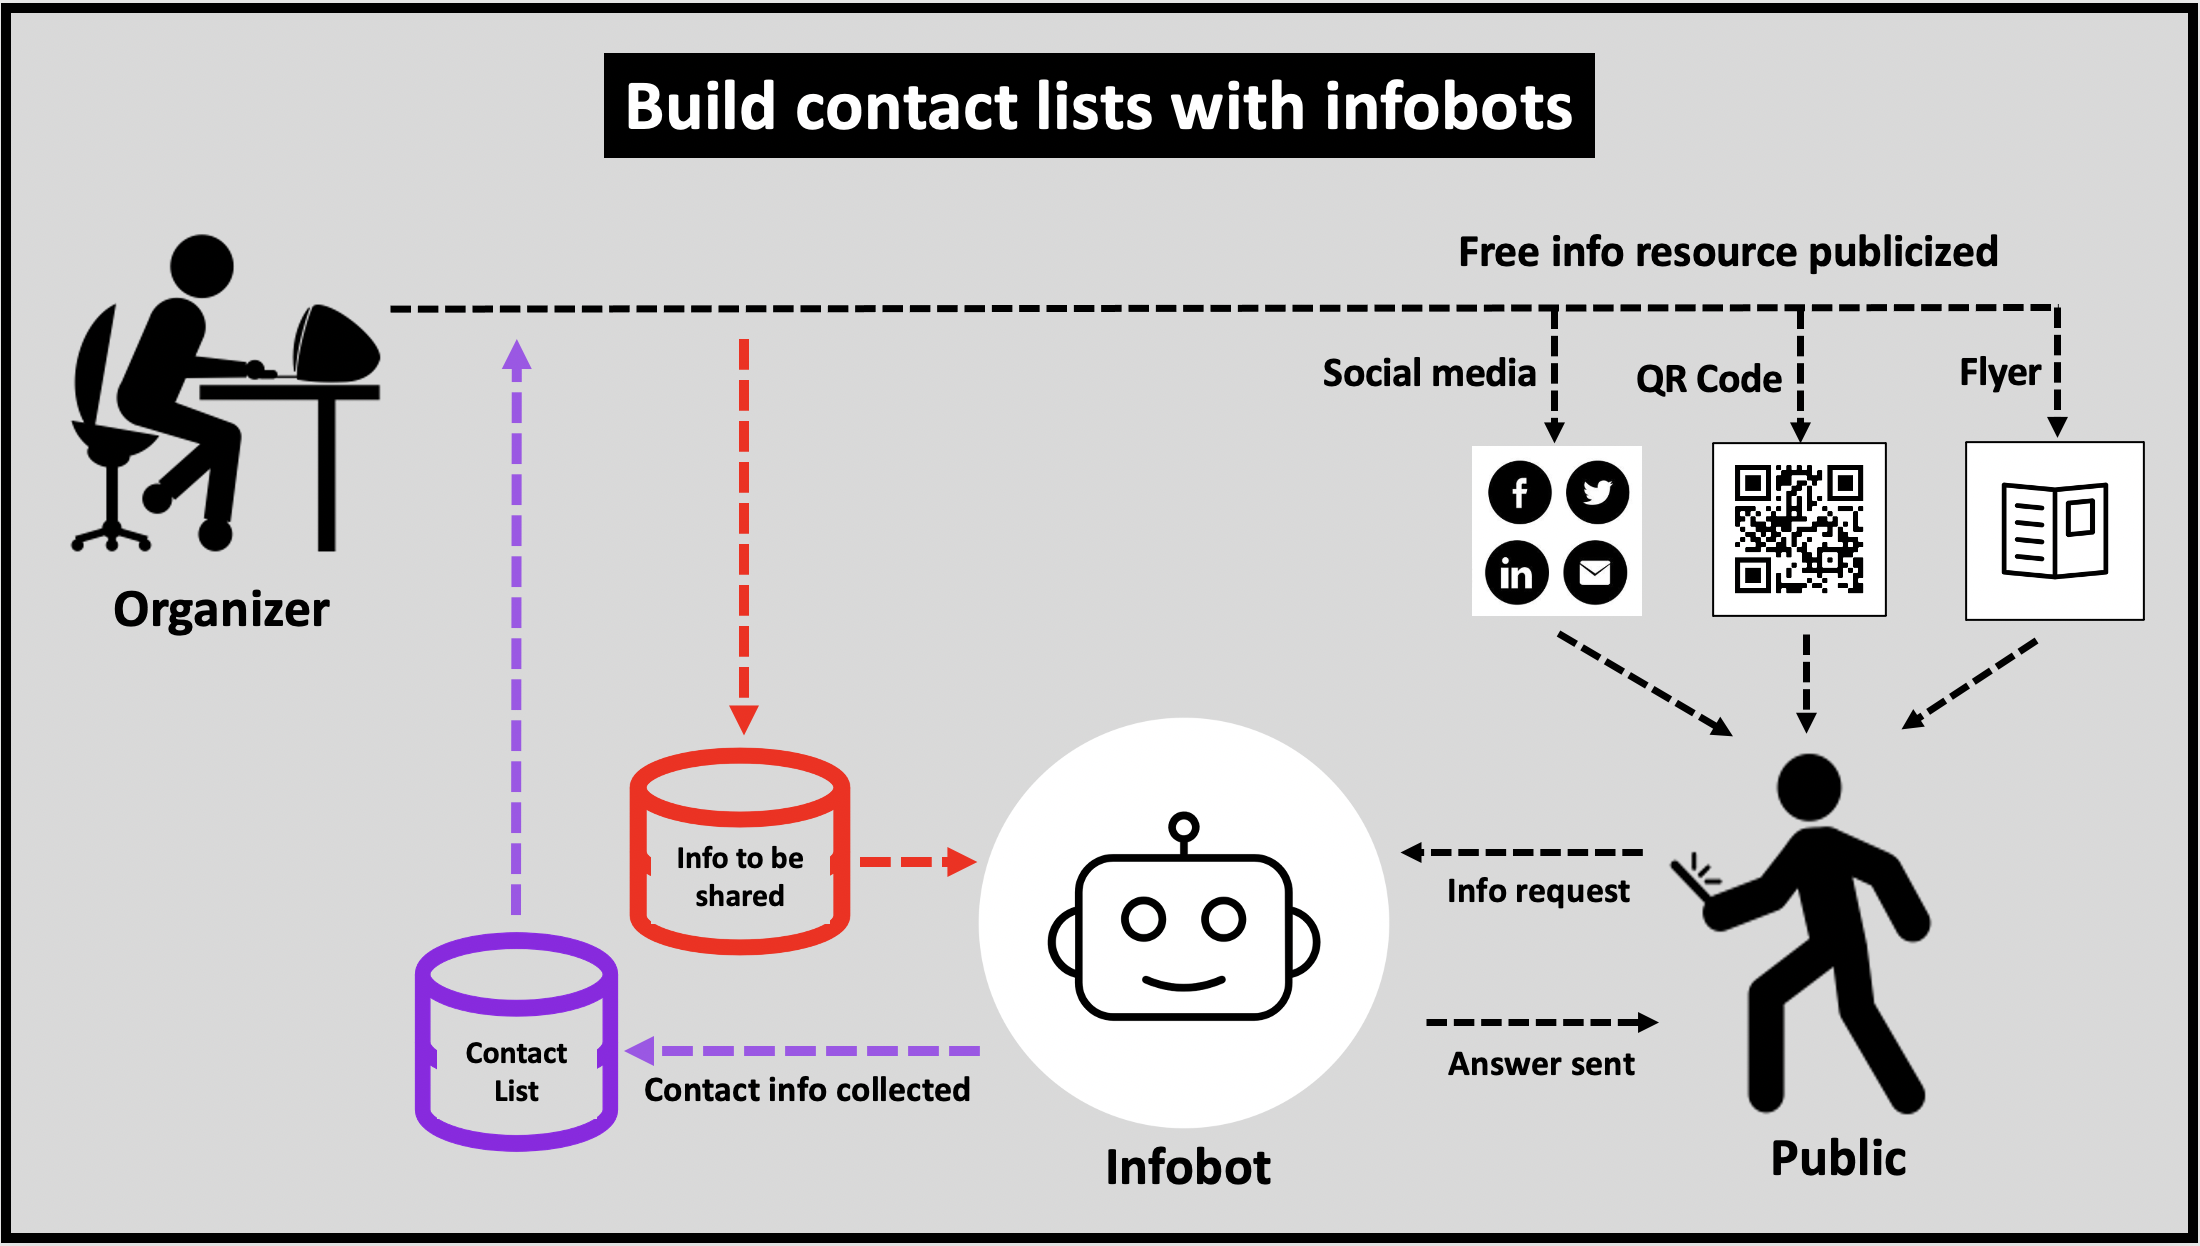 Use infobots to provide helpful information and collect contact details on the people being helped at the same time.